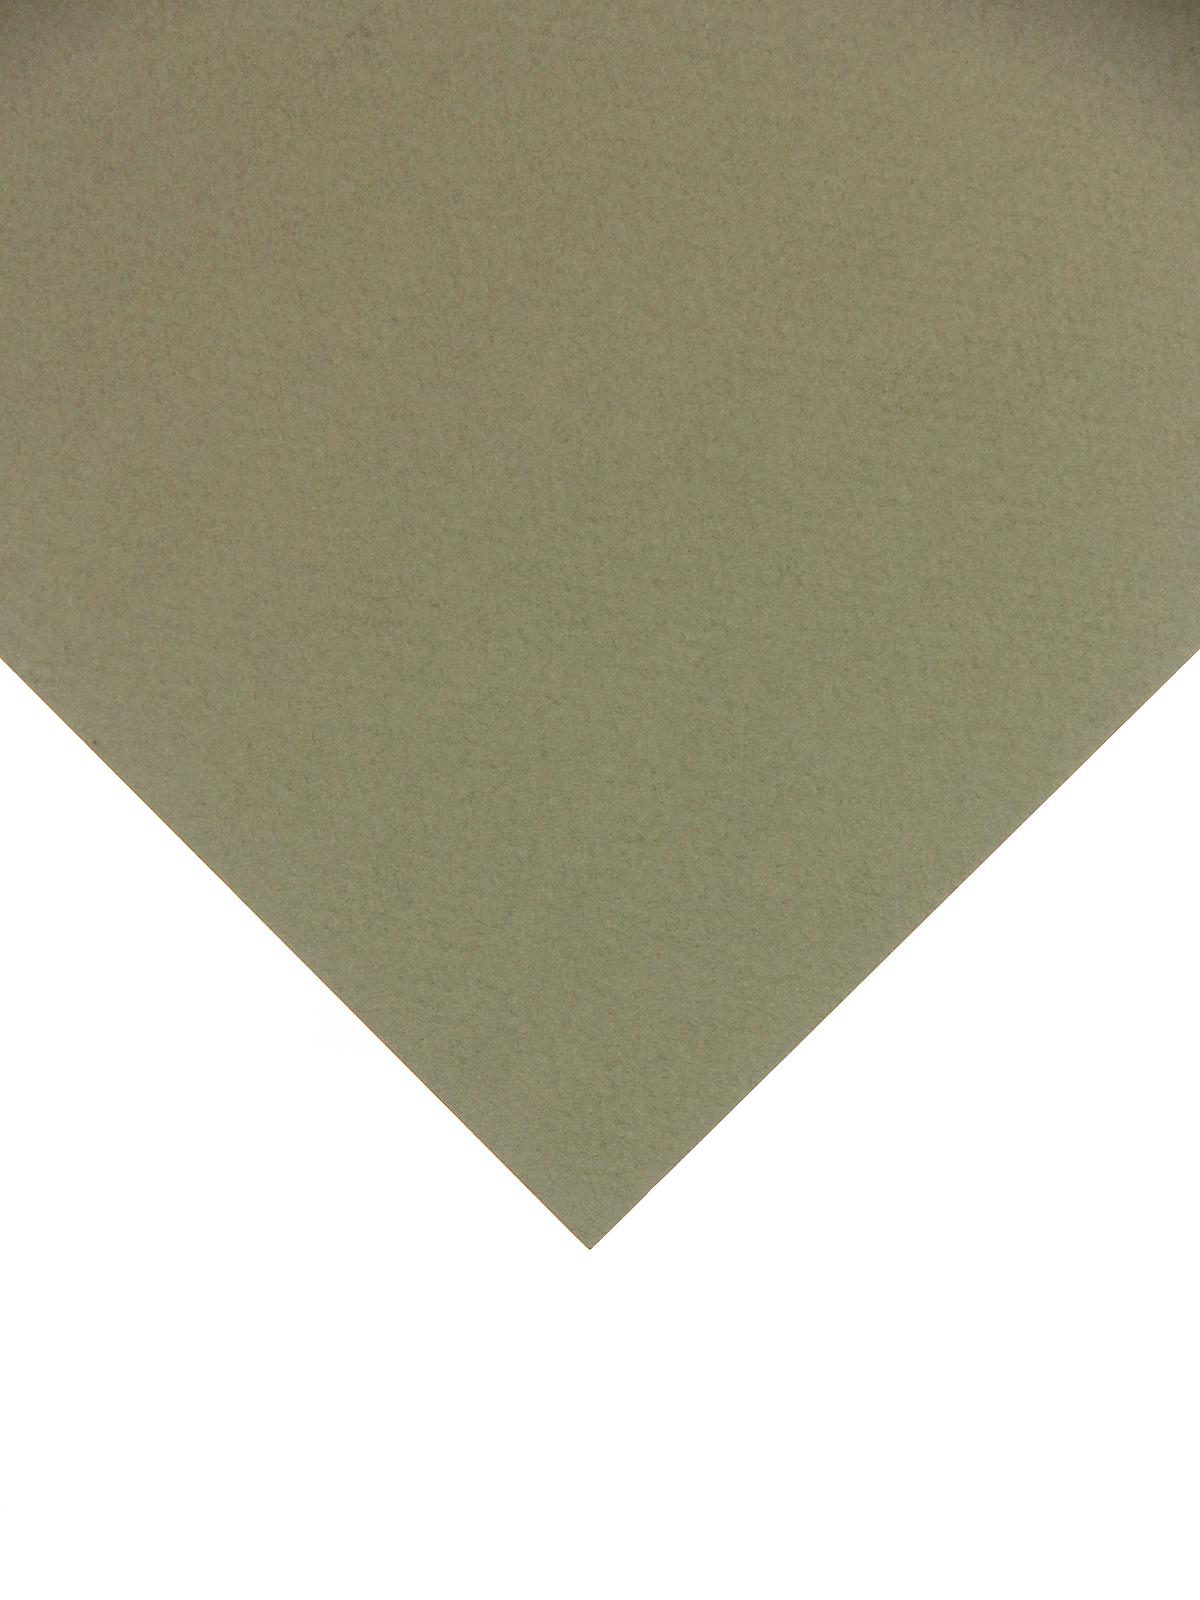 Mi-Teintes Tinted Paper Olive Green 8.5 In. X 11 In.